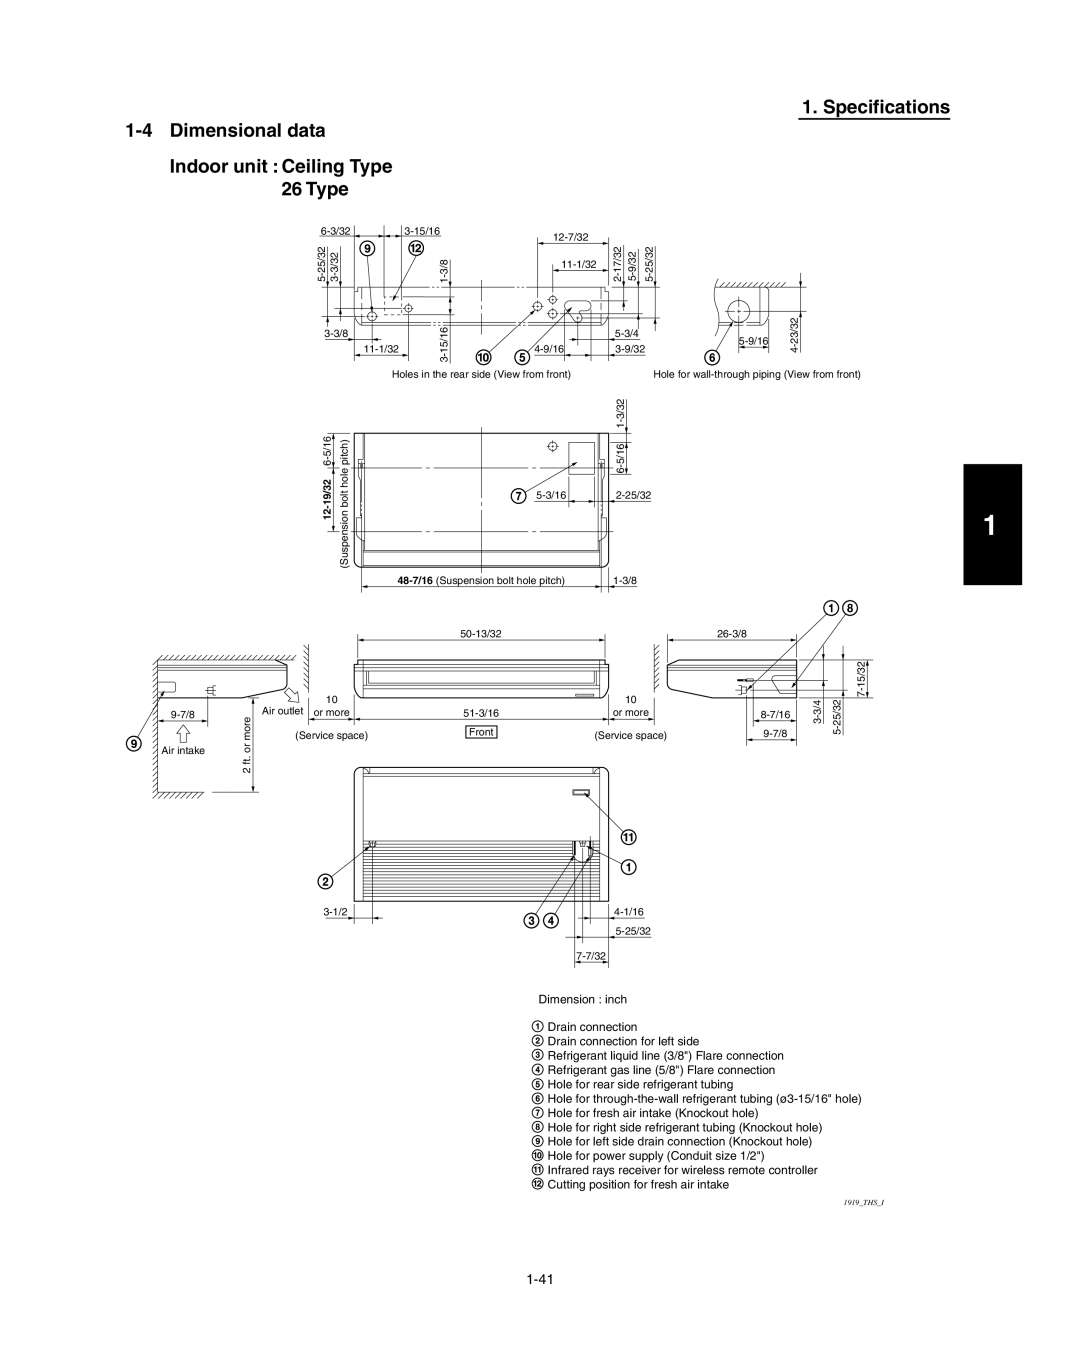 Panasonic R410A service manual Indoor unit : Ceiling Type 26 Type, Specifications 1-4Dimensional data 